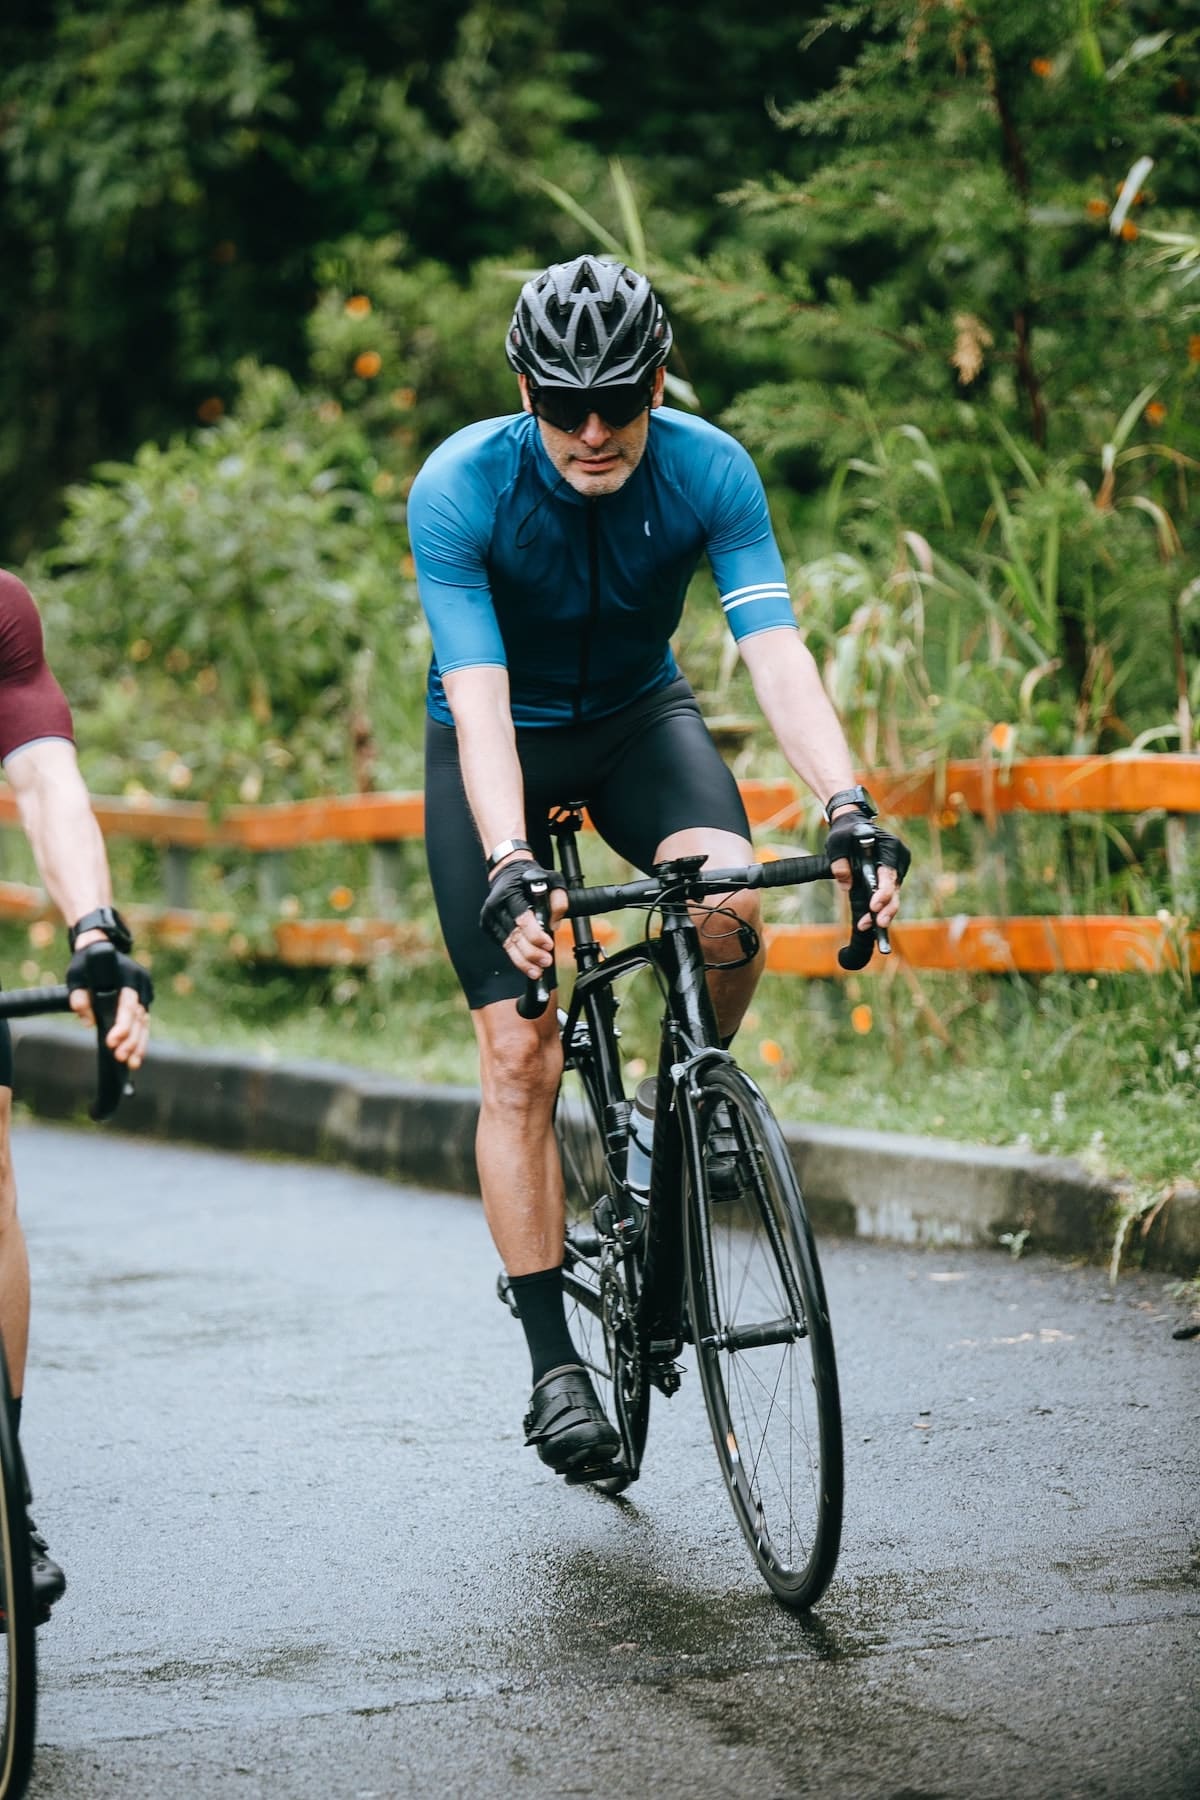 A cyclist wearing black shorts and a teal jersey.